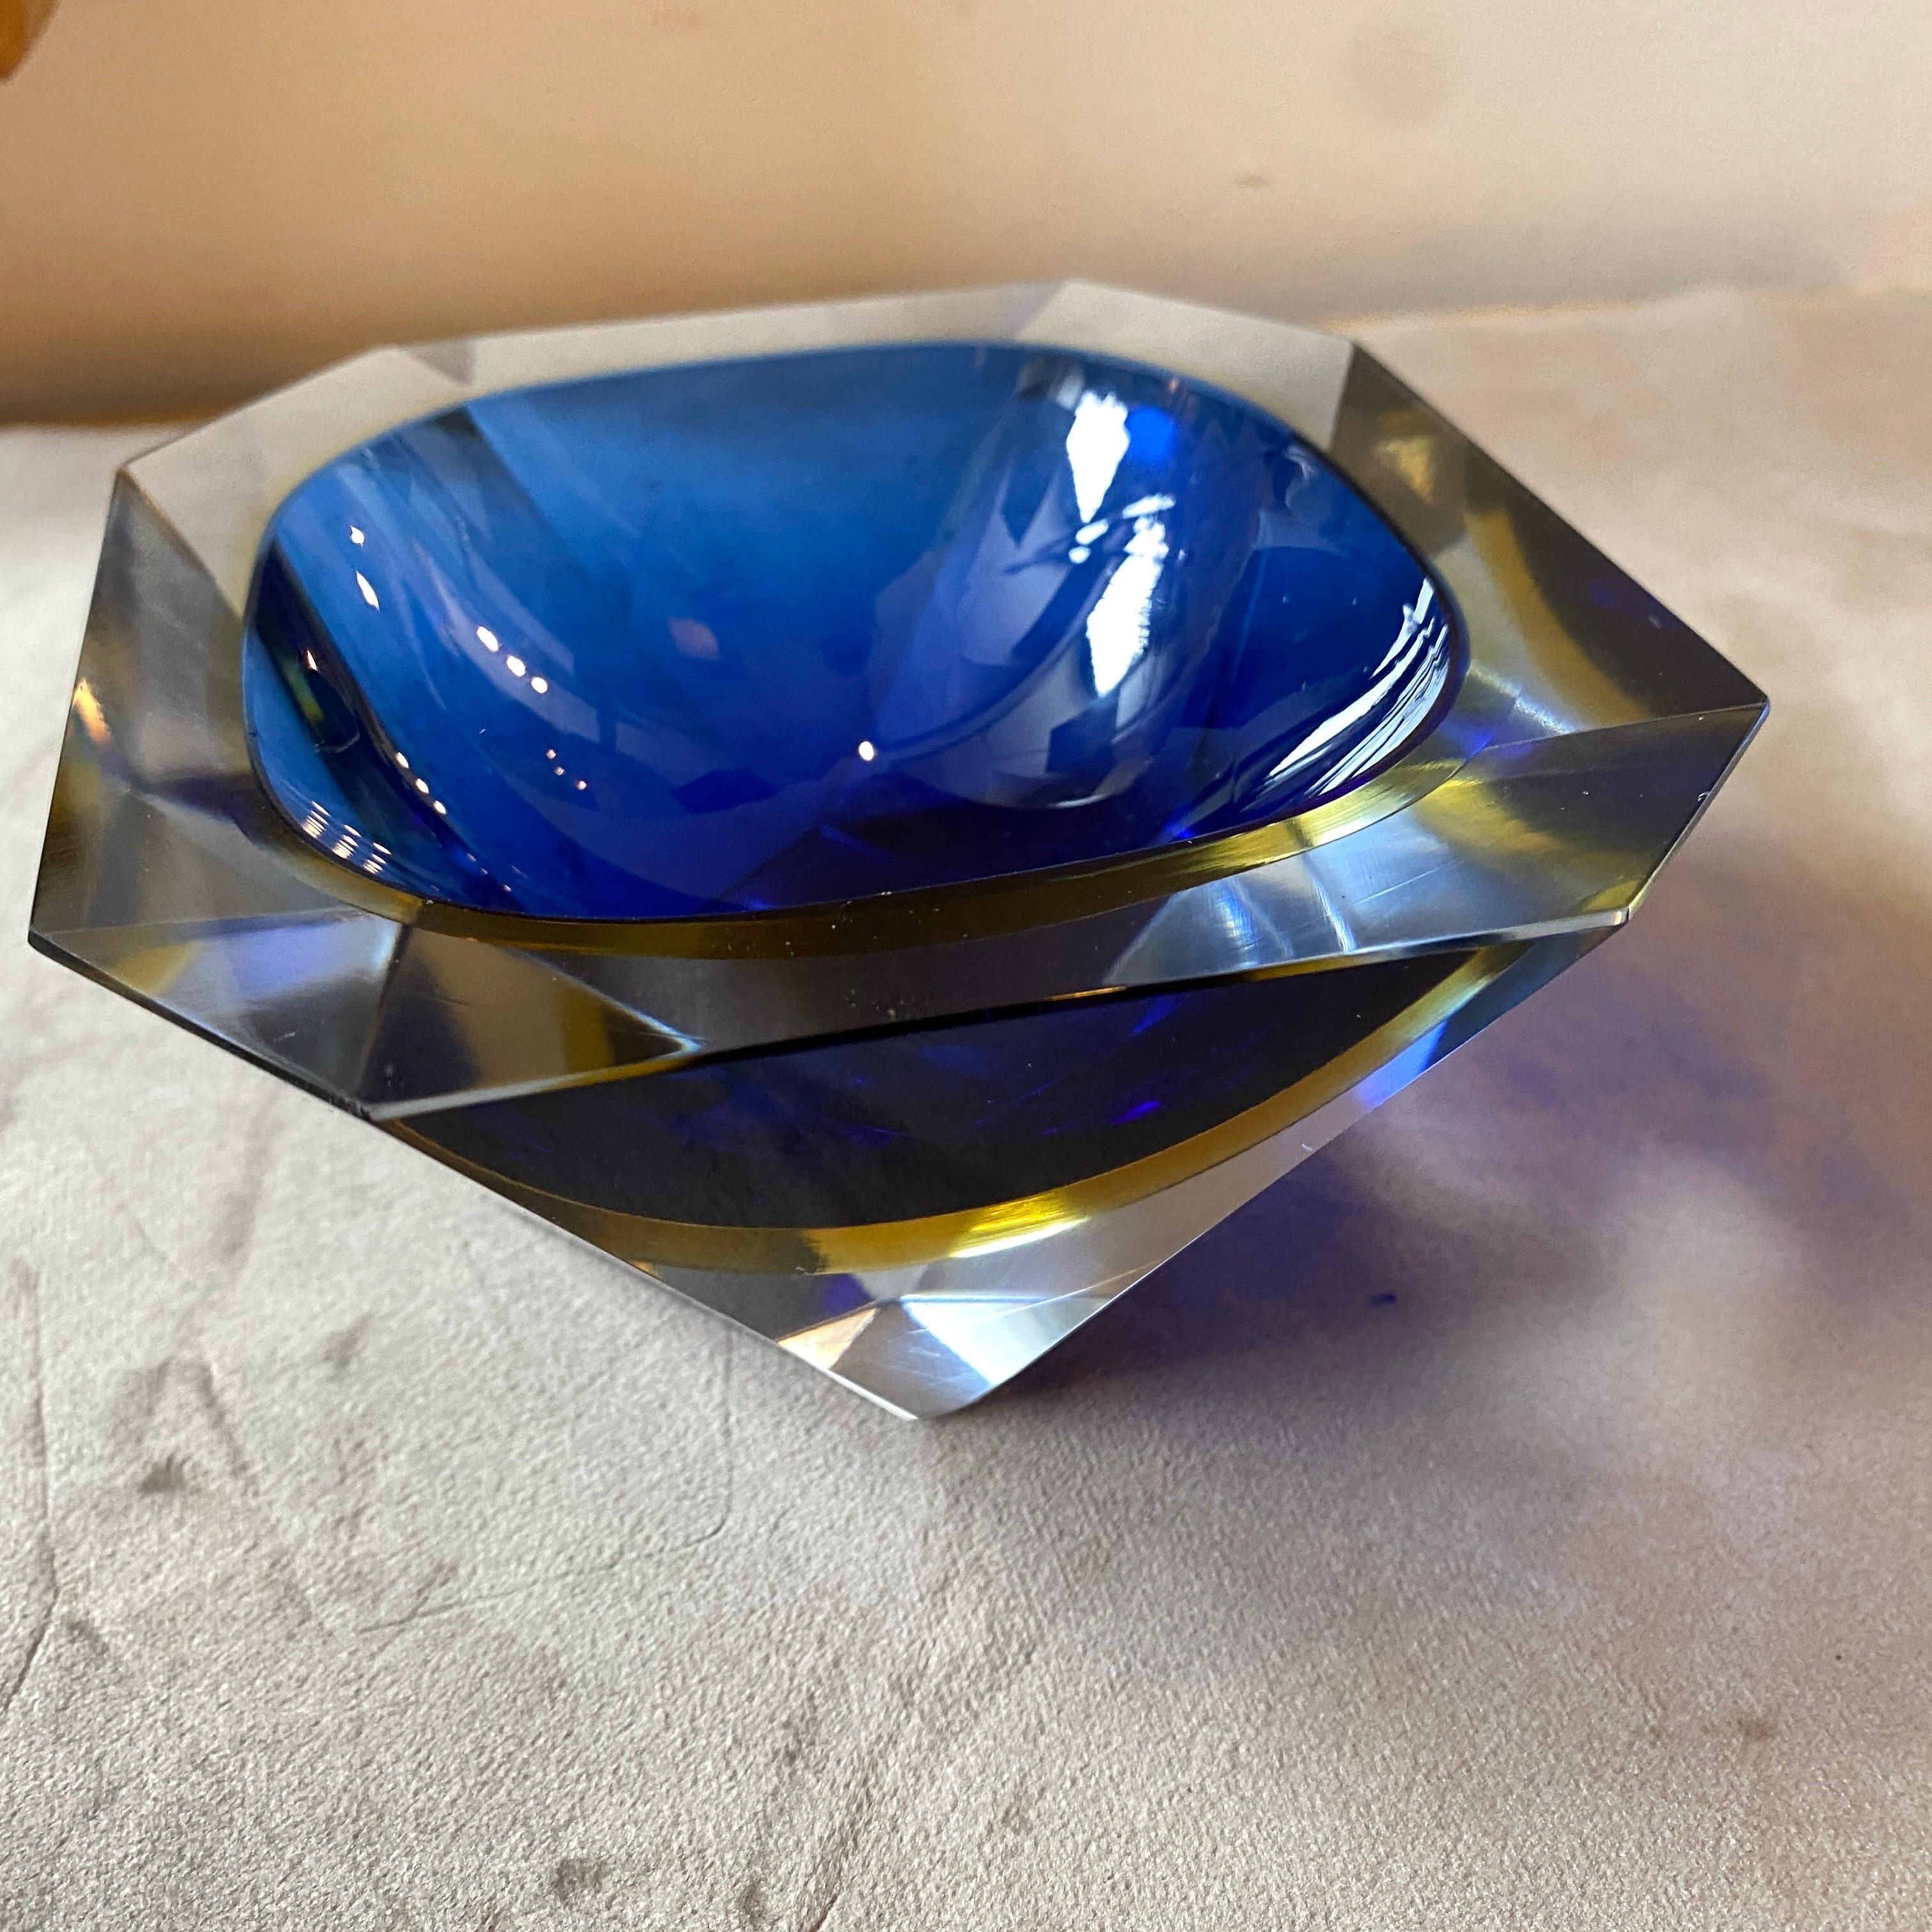 1970s Blue and Yellow Sommerso Faceted Murano Glass Ashtray by Seguso For Sale 6